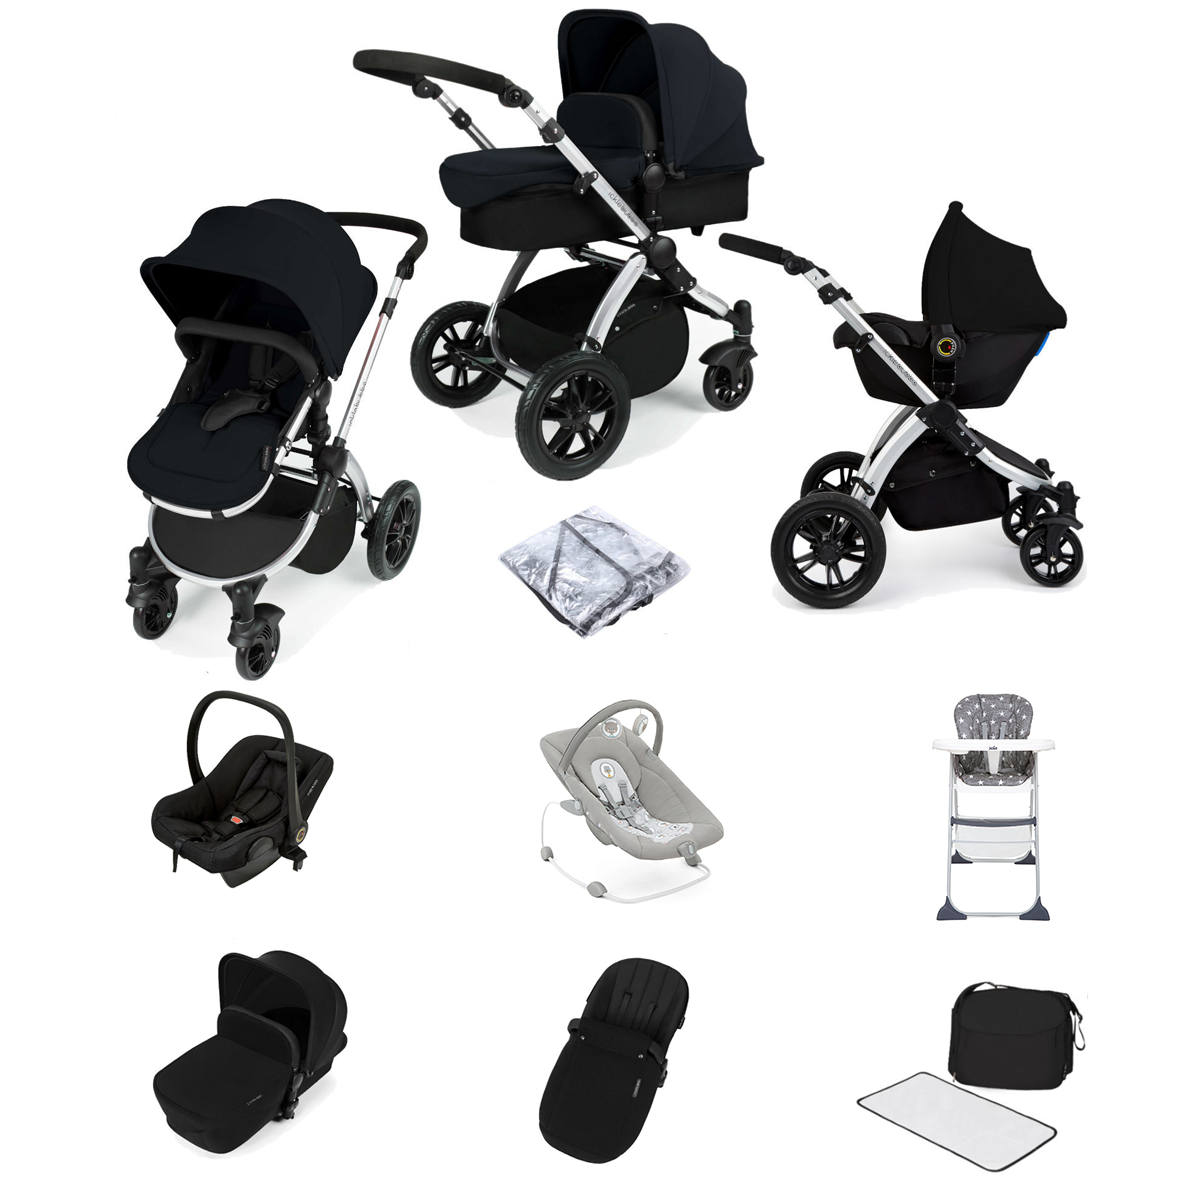 Ickle Bubba Stomp V2 (Silver Frame) All In One (Astral) 9 Piece Travel System Bundle - Black